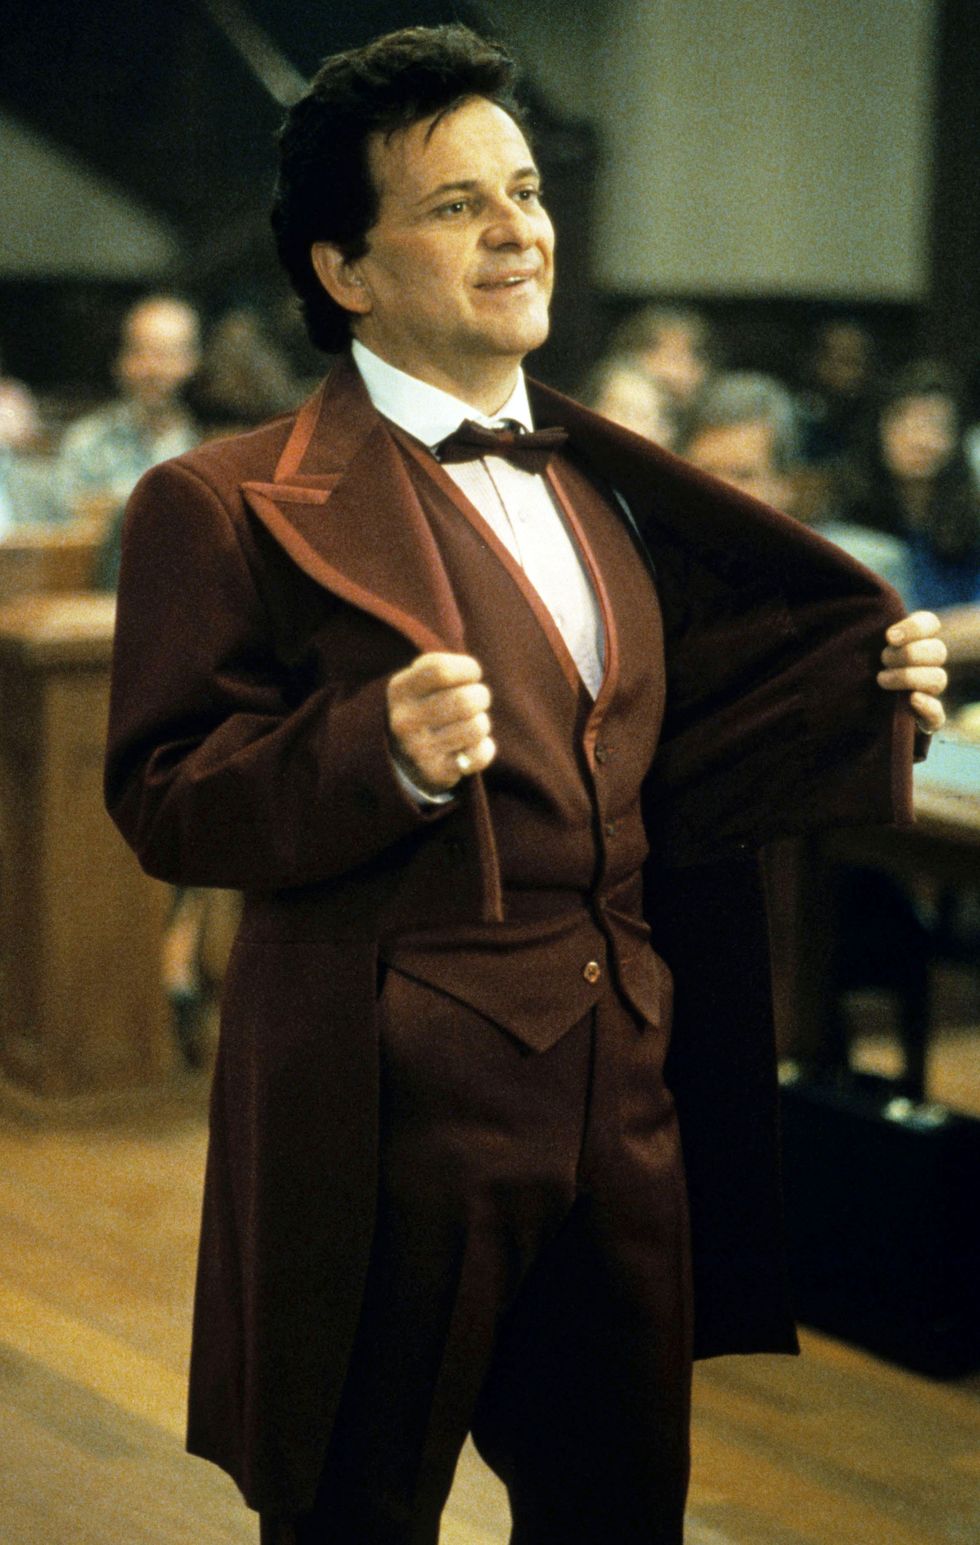 Joe Pesci, 80, Star of 'Home Alone' and 'Casino' Is a Style Icon